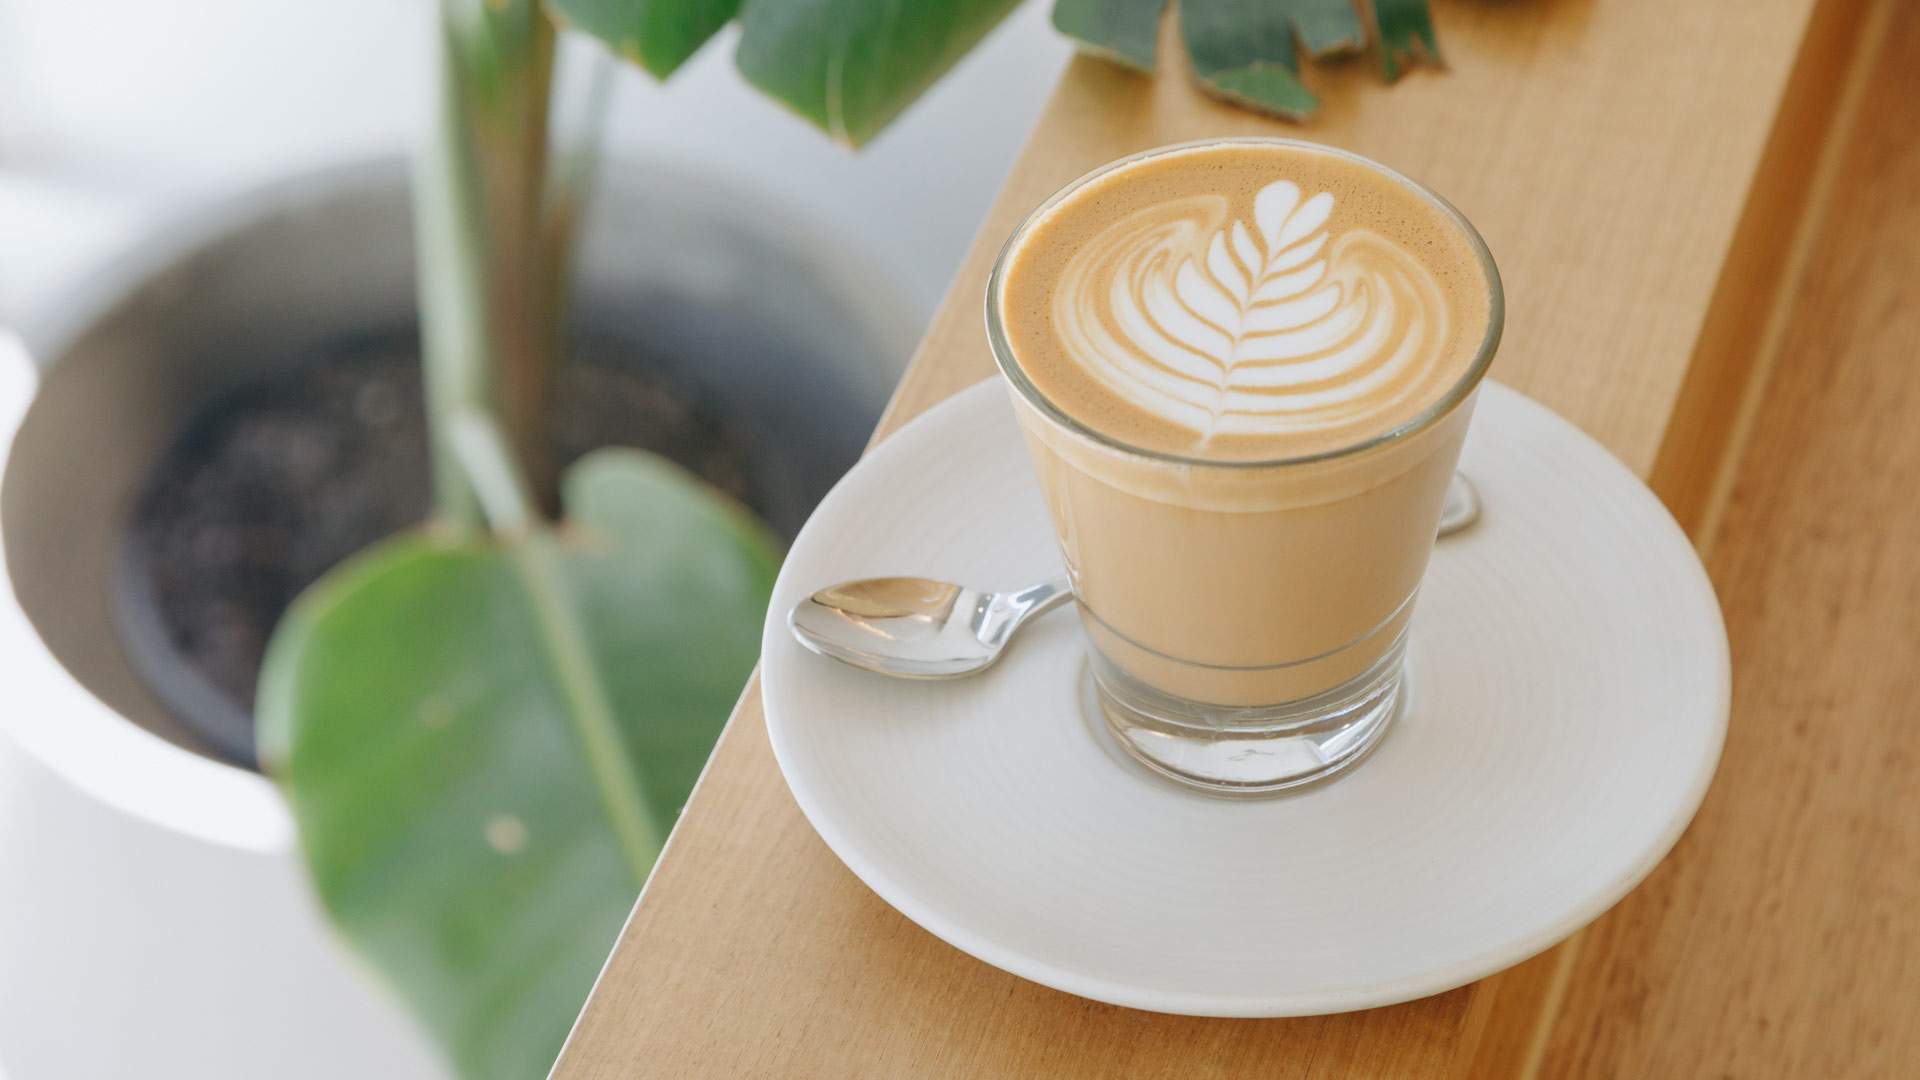 Melbourne Coffee Pioneer Industry Beans Is Opening Its First Sydney Cafe